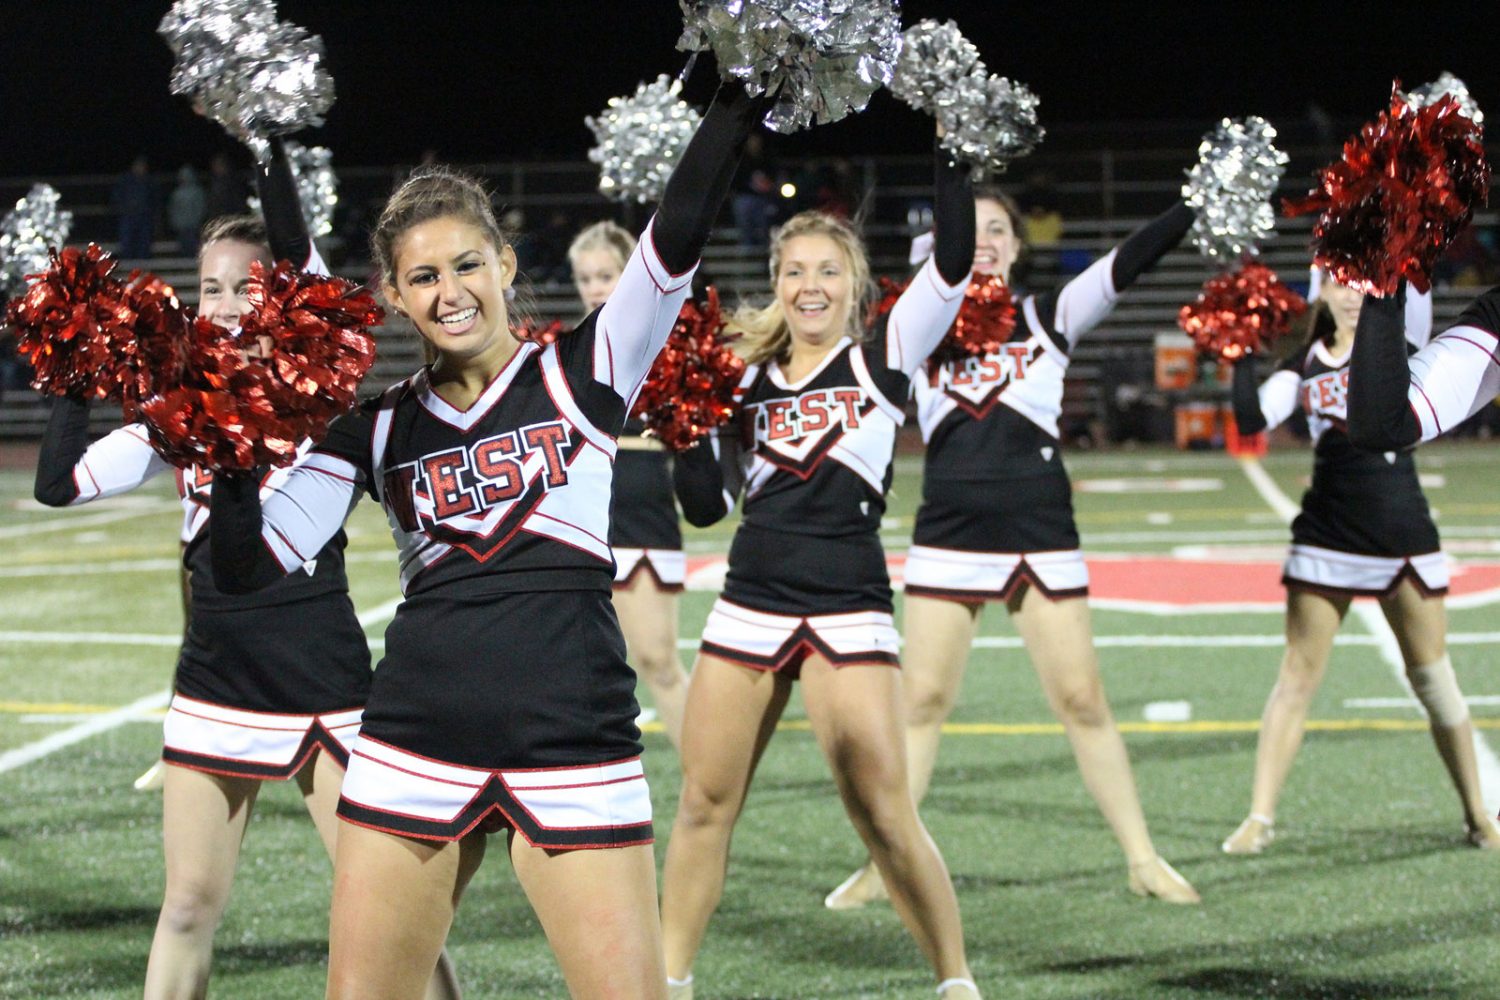 Poms Head to State, Officially an IHSA Sport